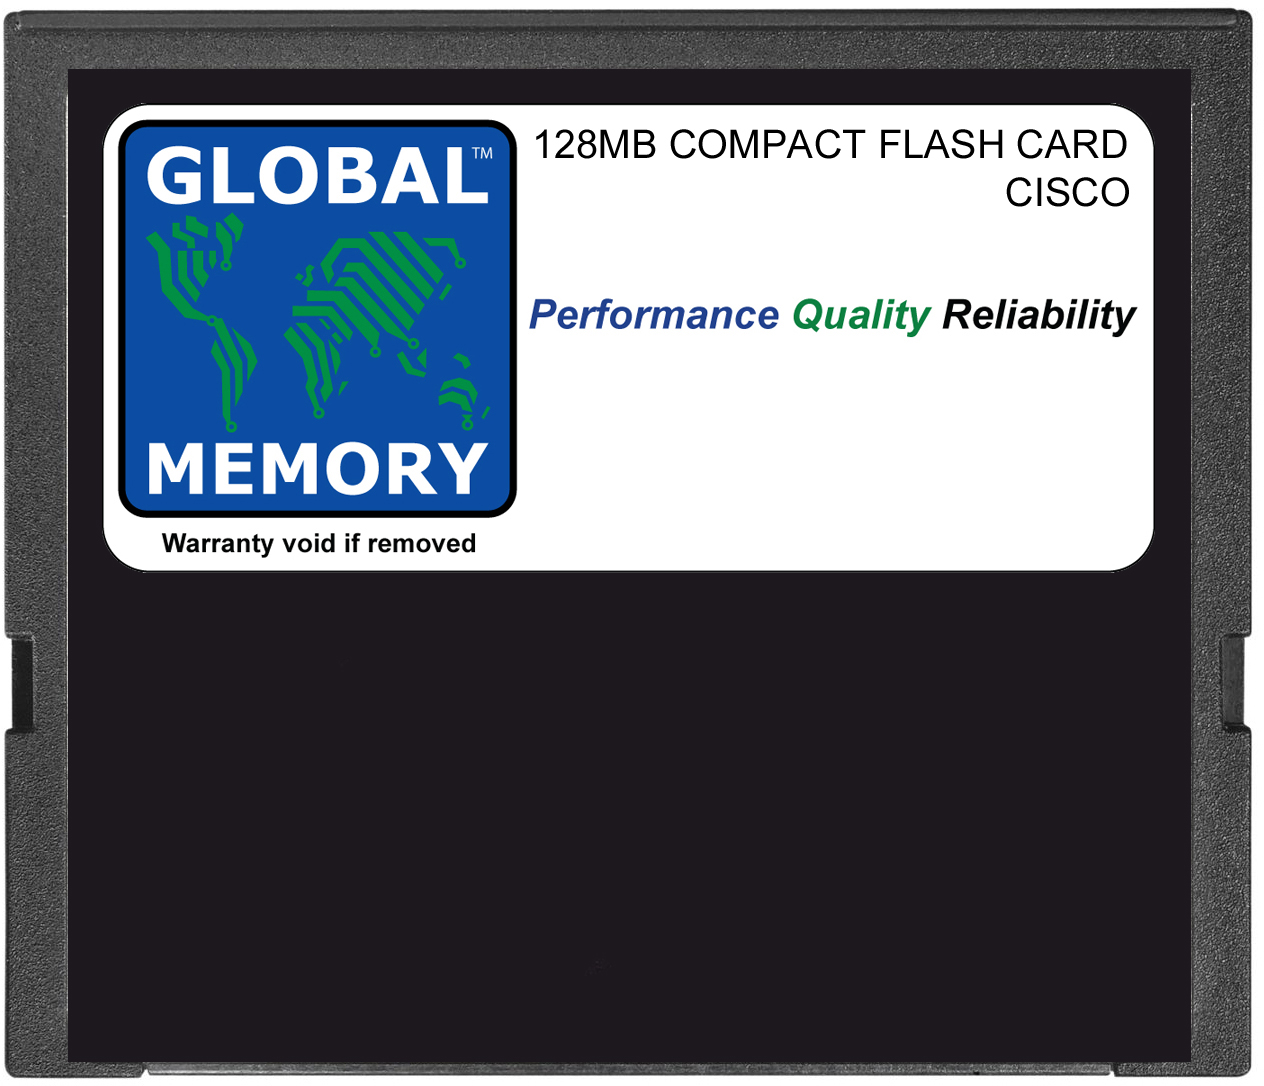 128MB COMPACT FLASH CARD MEMORY FOR CISCO 7304 ROUTERS NSE-100 / 7304 ROUTERS NPE-G100 (7300-I/O-CFM-128M)